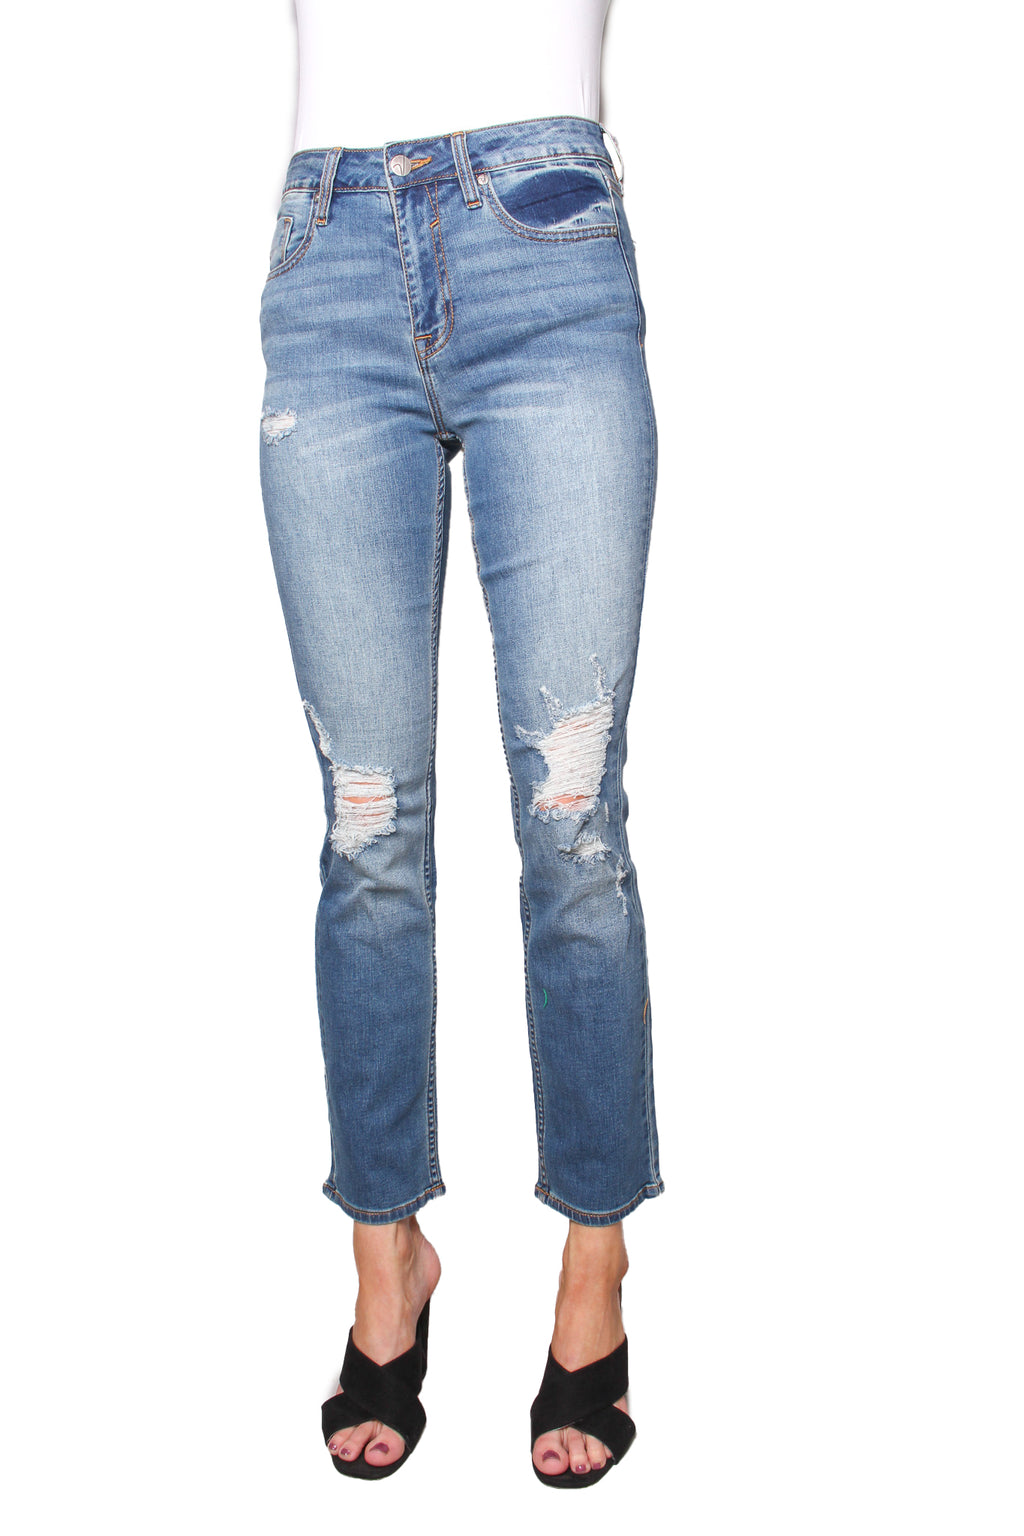 Women's High Waisted Tattered Skinny Jeans